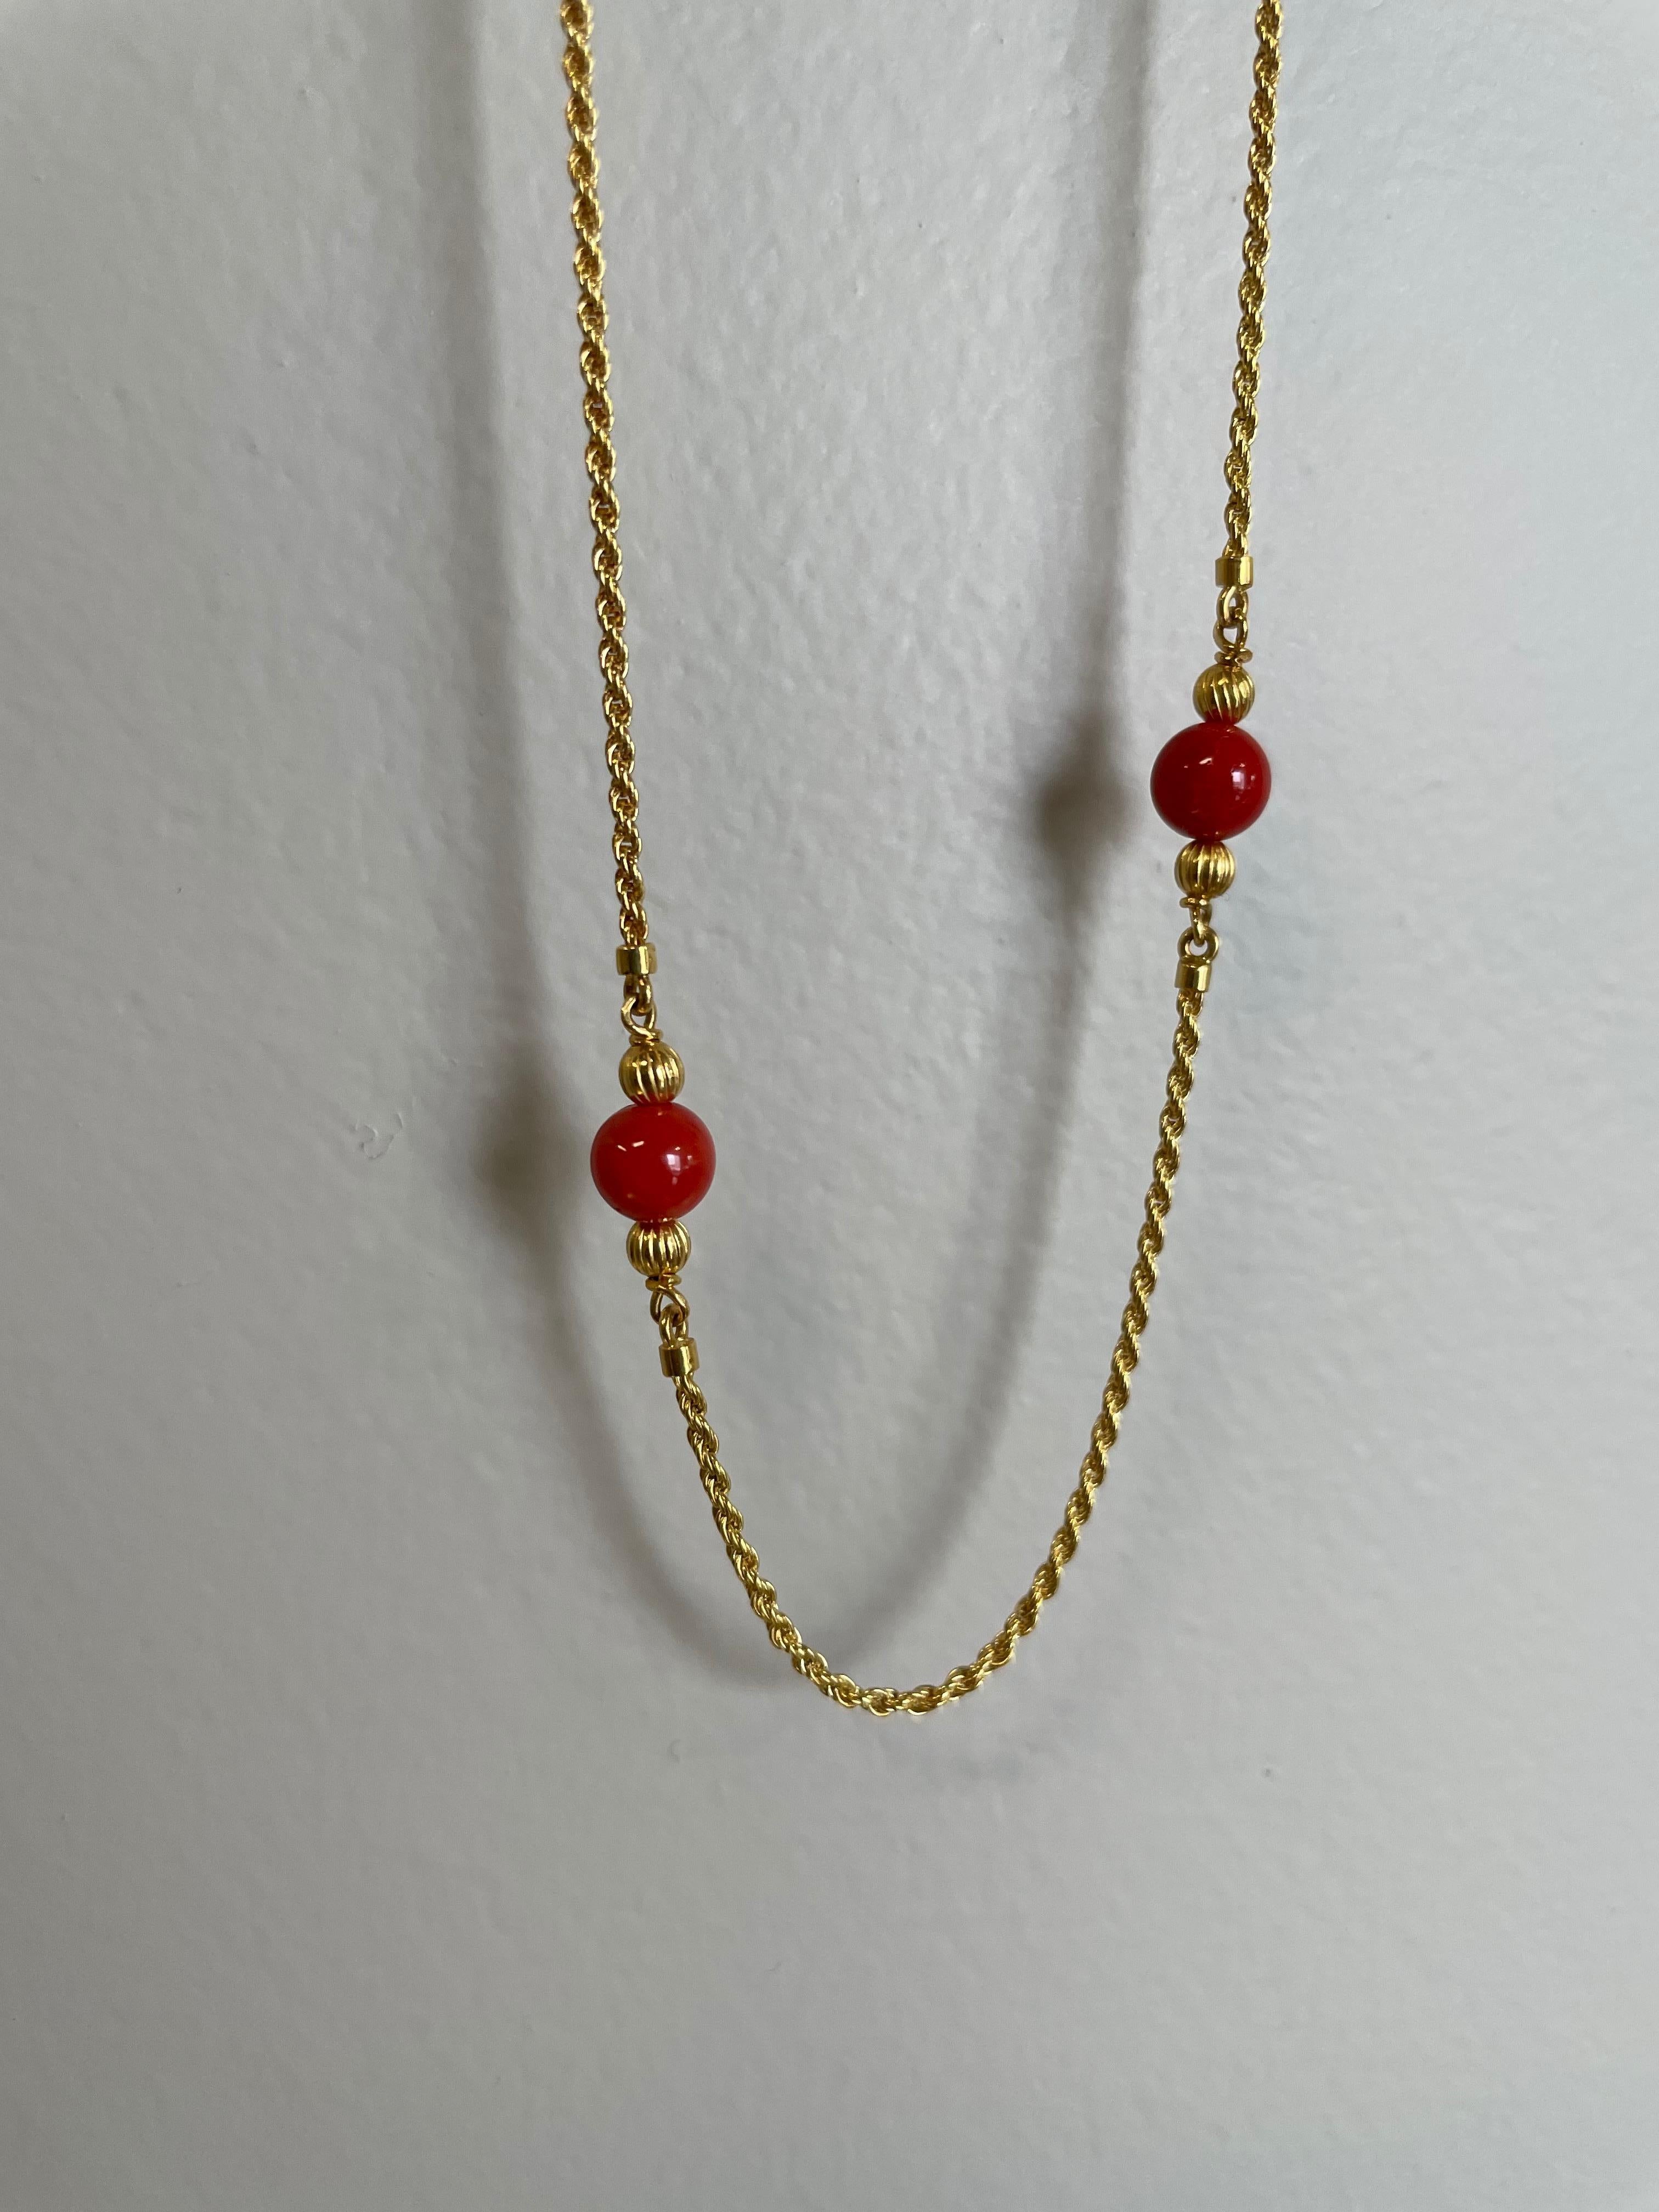 Rosior Long Chain manufactured in Yellow Gold with small Coral Beads
Accompanied with its own Certificate of Authenticity.
Stamped by the Portuguese Assay Office as 19,2k Gold.
Stamped with Rosior Hallmark.
For other informations and videos of this